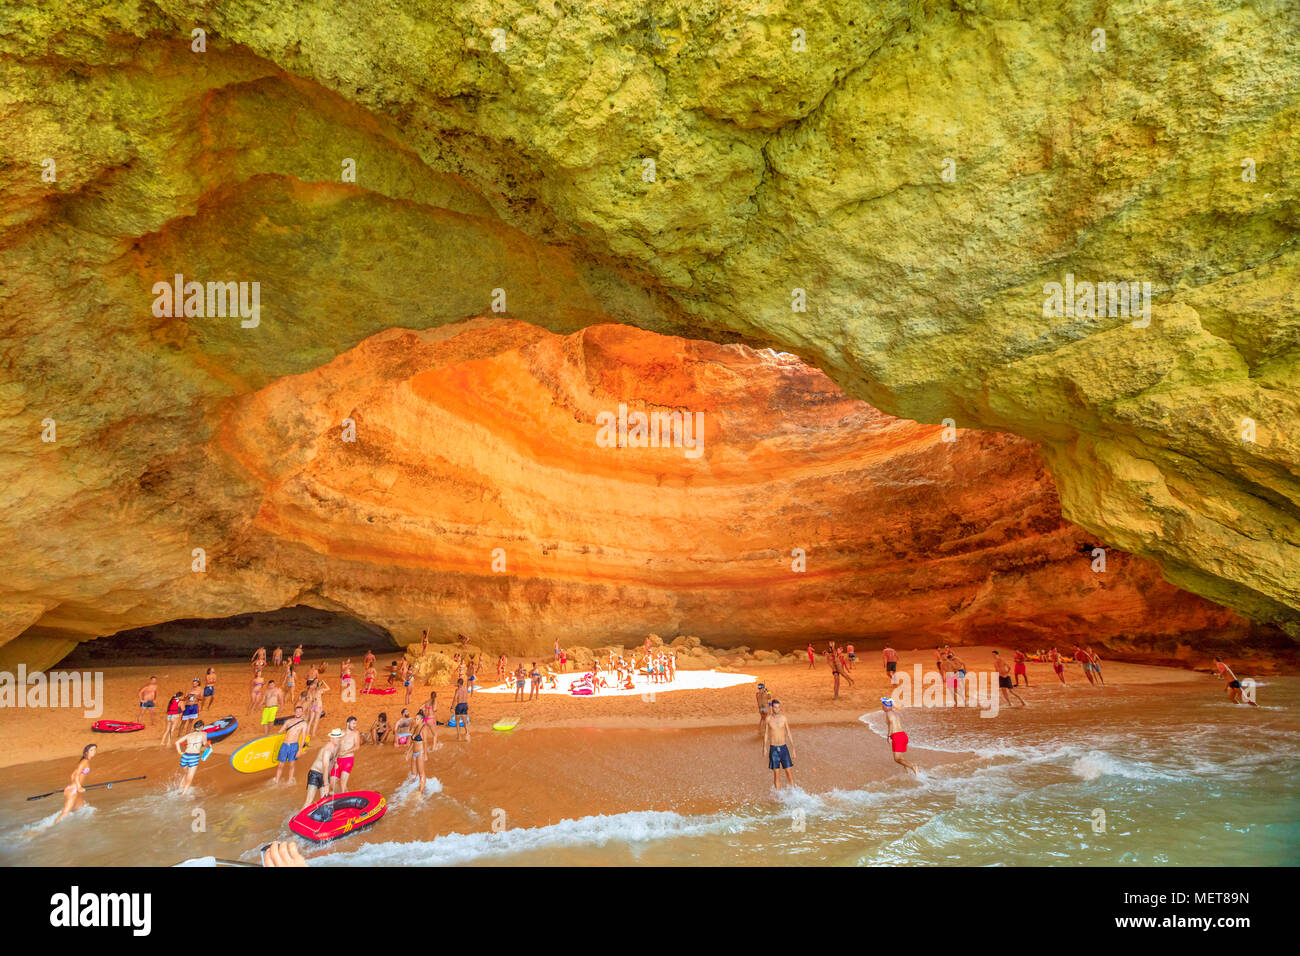 Benagil, Portugal - August 23, 2017: tourists on the sand beach inside sea cave listed in the world's top 10 best caves. People visiting Benagil Cave swimming from Benagil Beach or by boat trip. Stock Photo